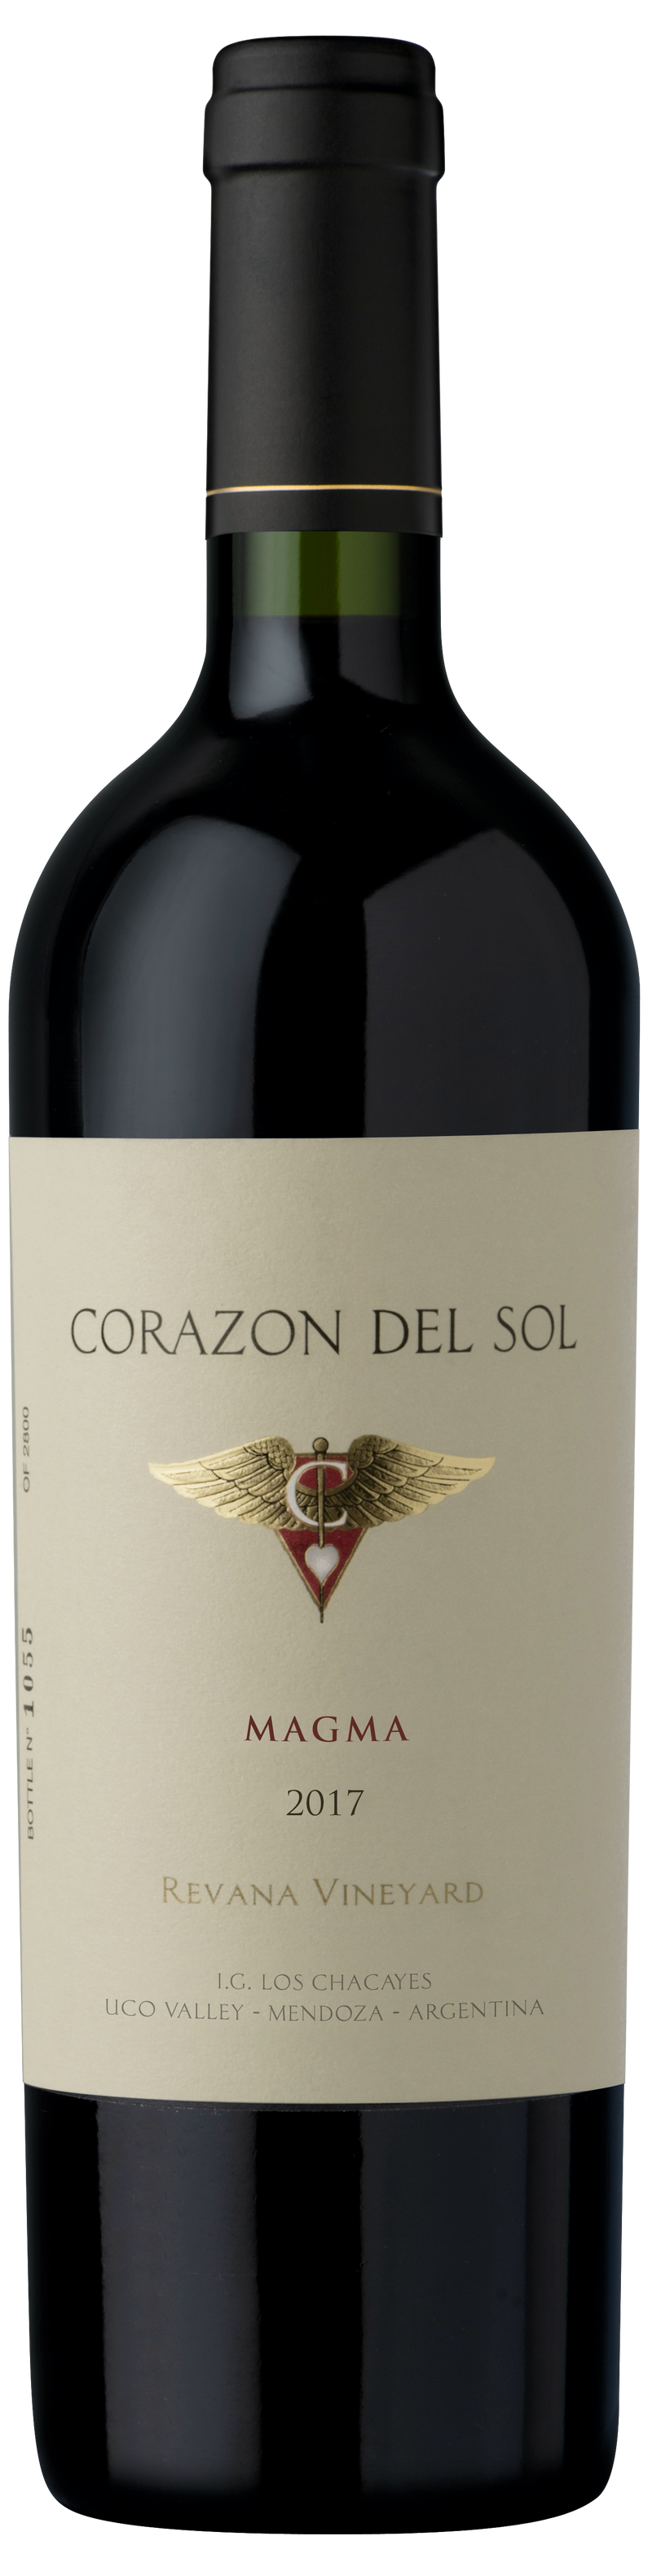 Corazon del Sol, MAGMA, Bordeaux Red Blend, Uco Valley, 2017